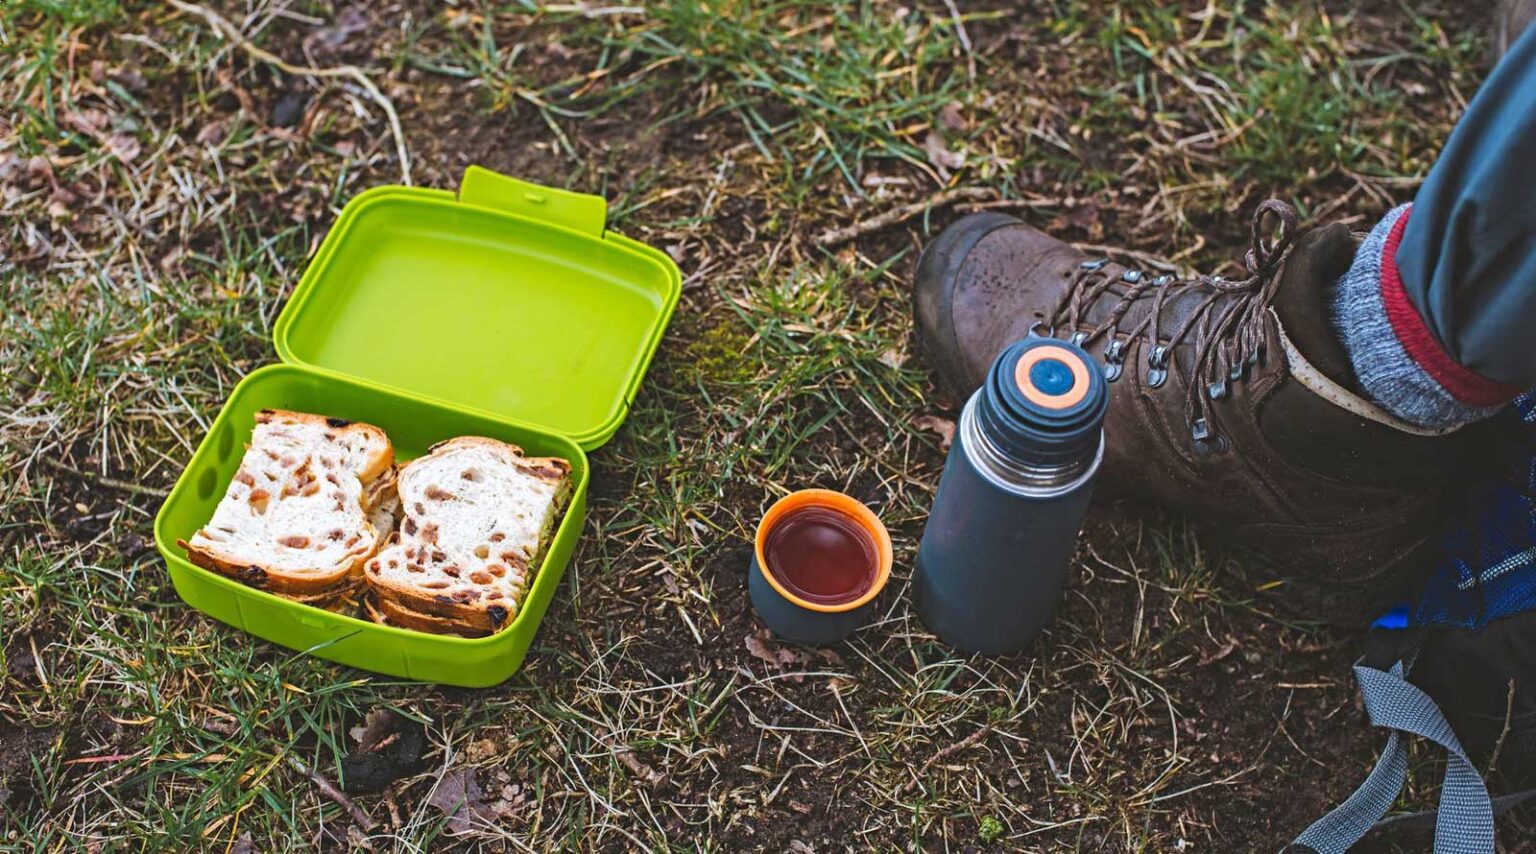 How to Keep Food Cold While Backpacking? - Keep FooD ColD While Backpacking 1536x854